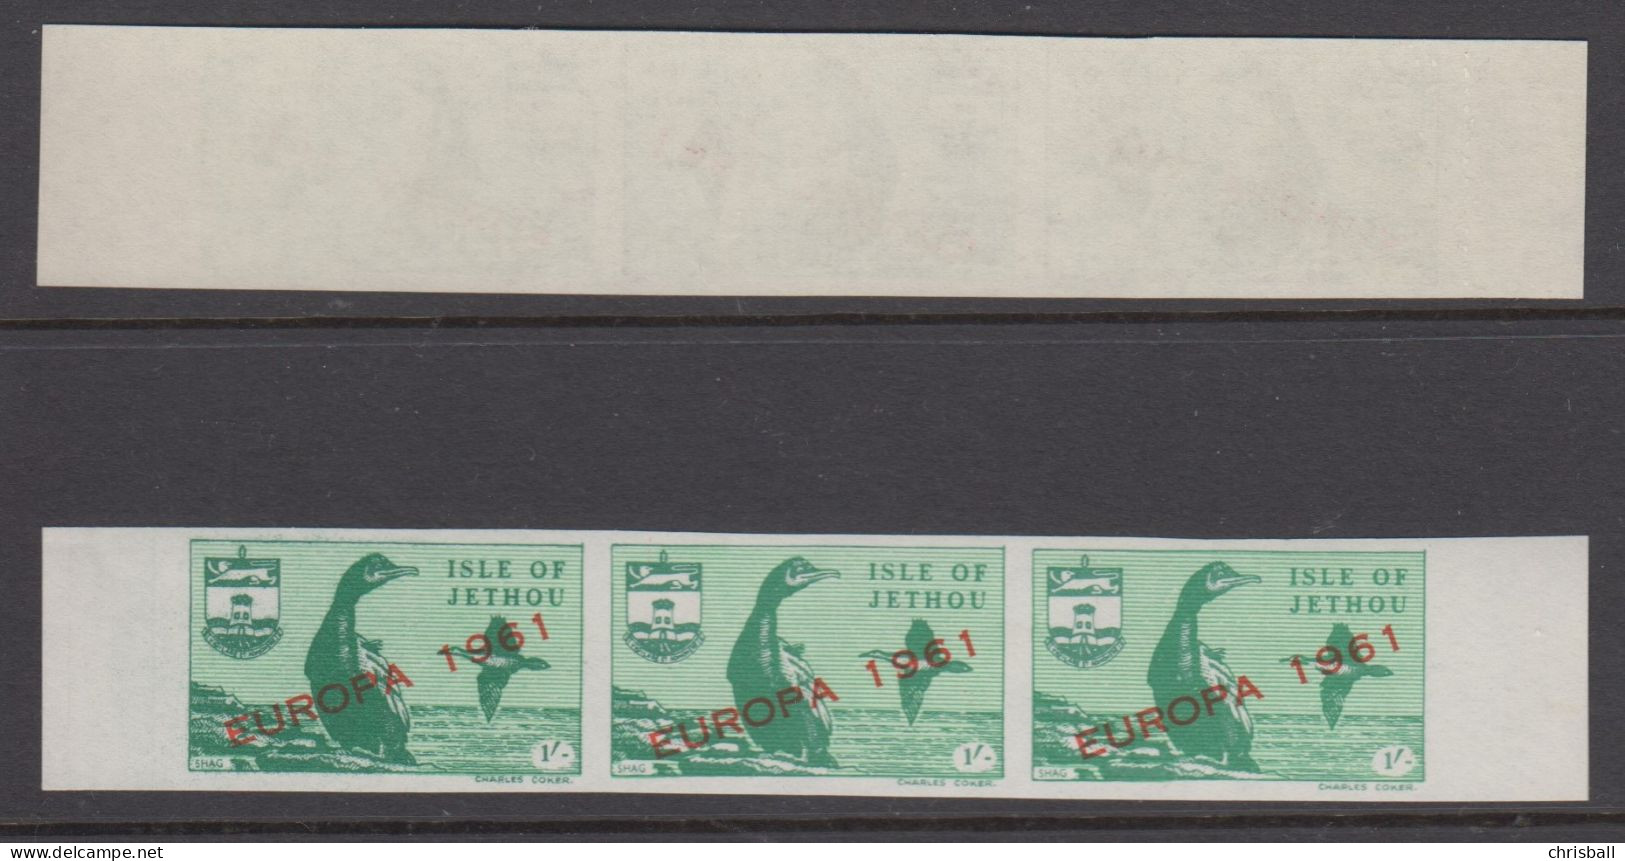 Jethou - Guernsey Strip 3 1/- Europa 1961 IMPERF. Thin White Paper - Guernesey